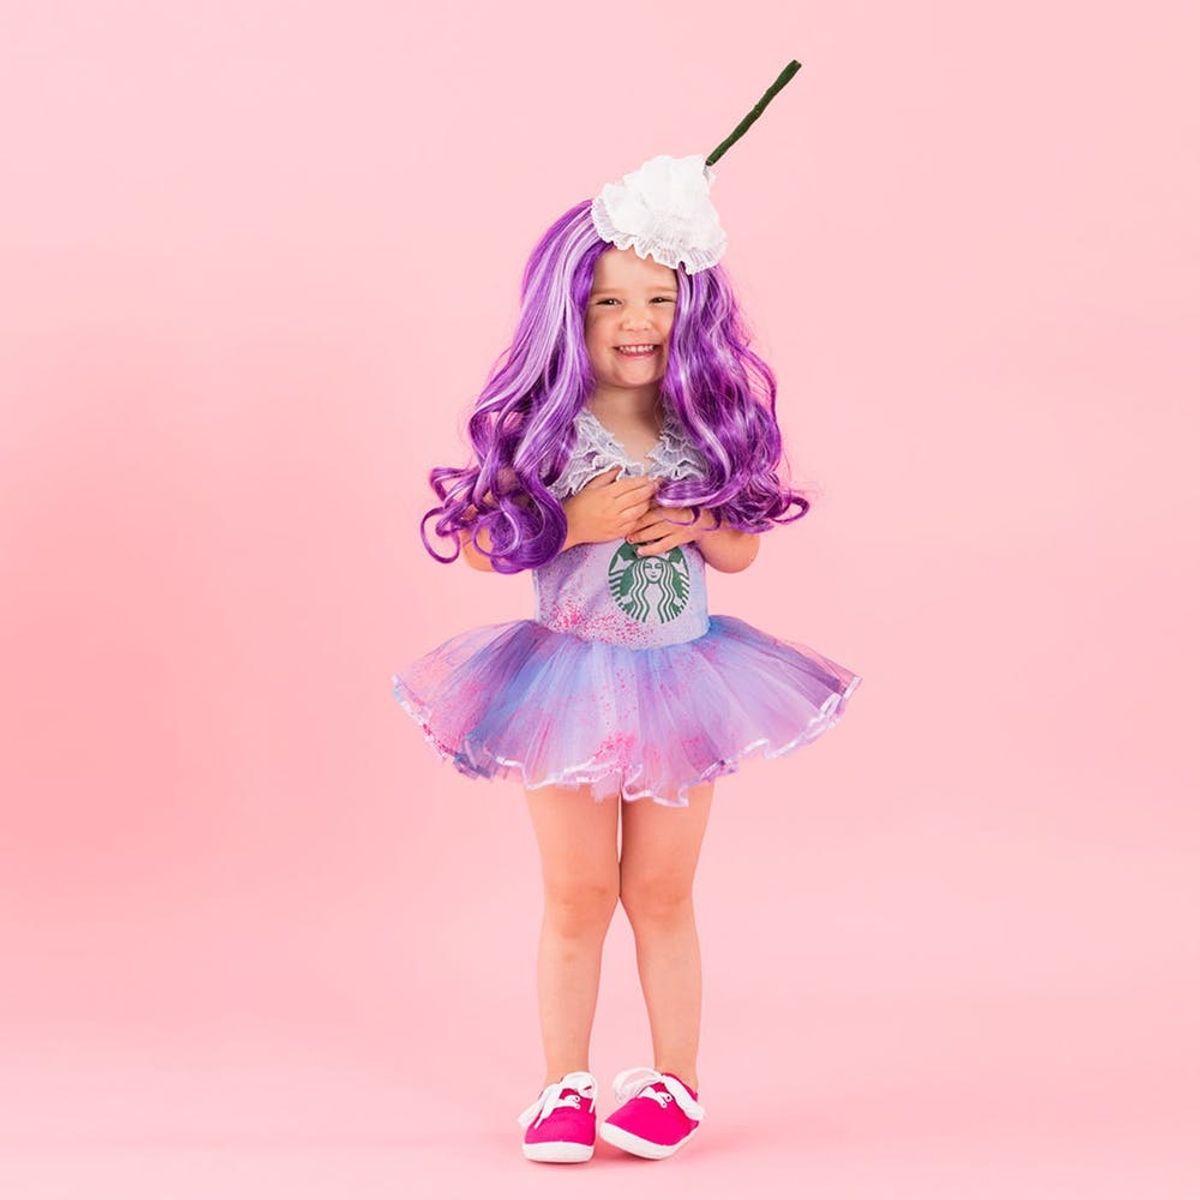 Your Little Toddler Will Love These Three Adorable Costumes for Halloween